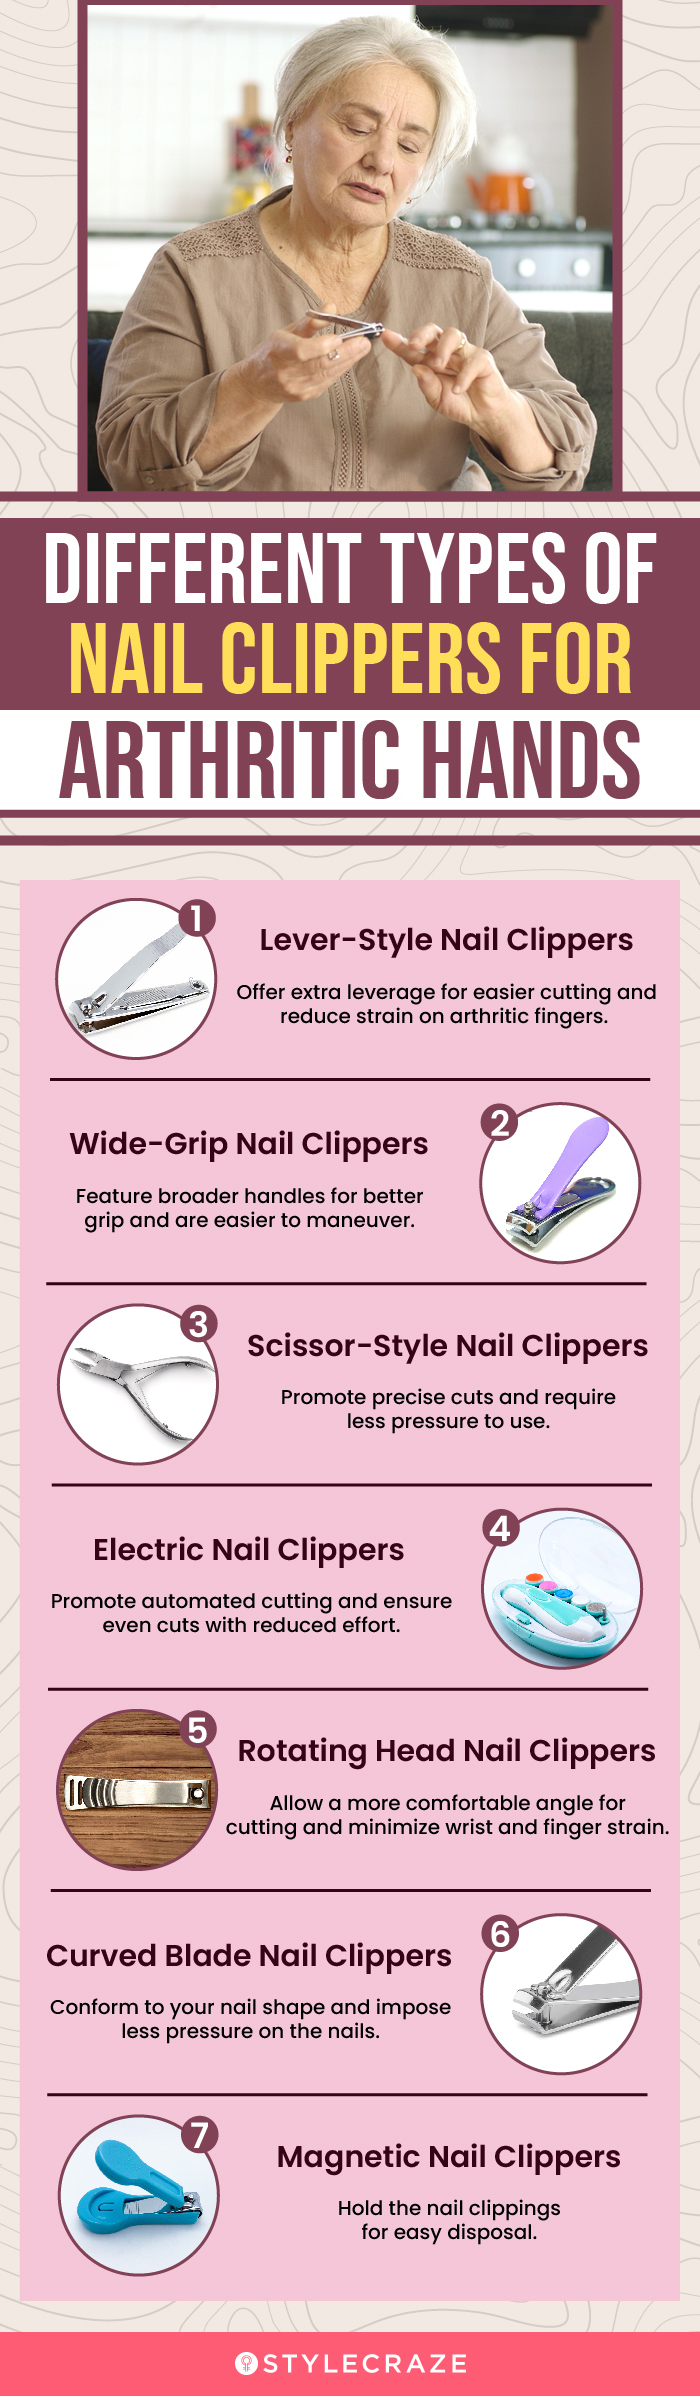 Different Types Of Nail Clippers For Arthritic Hands (infographic)